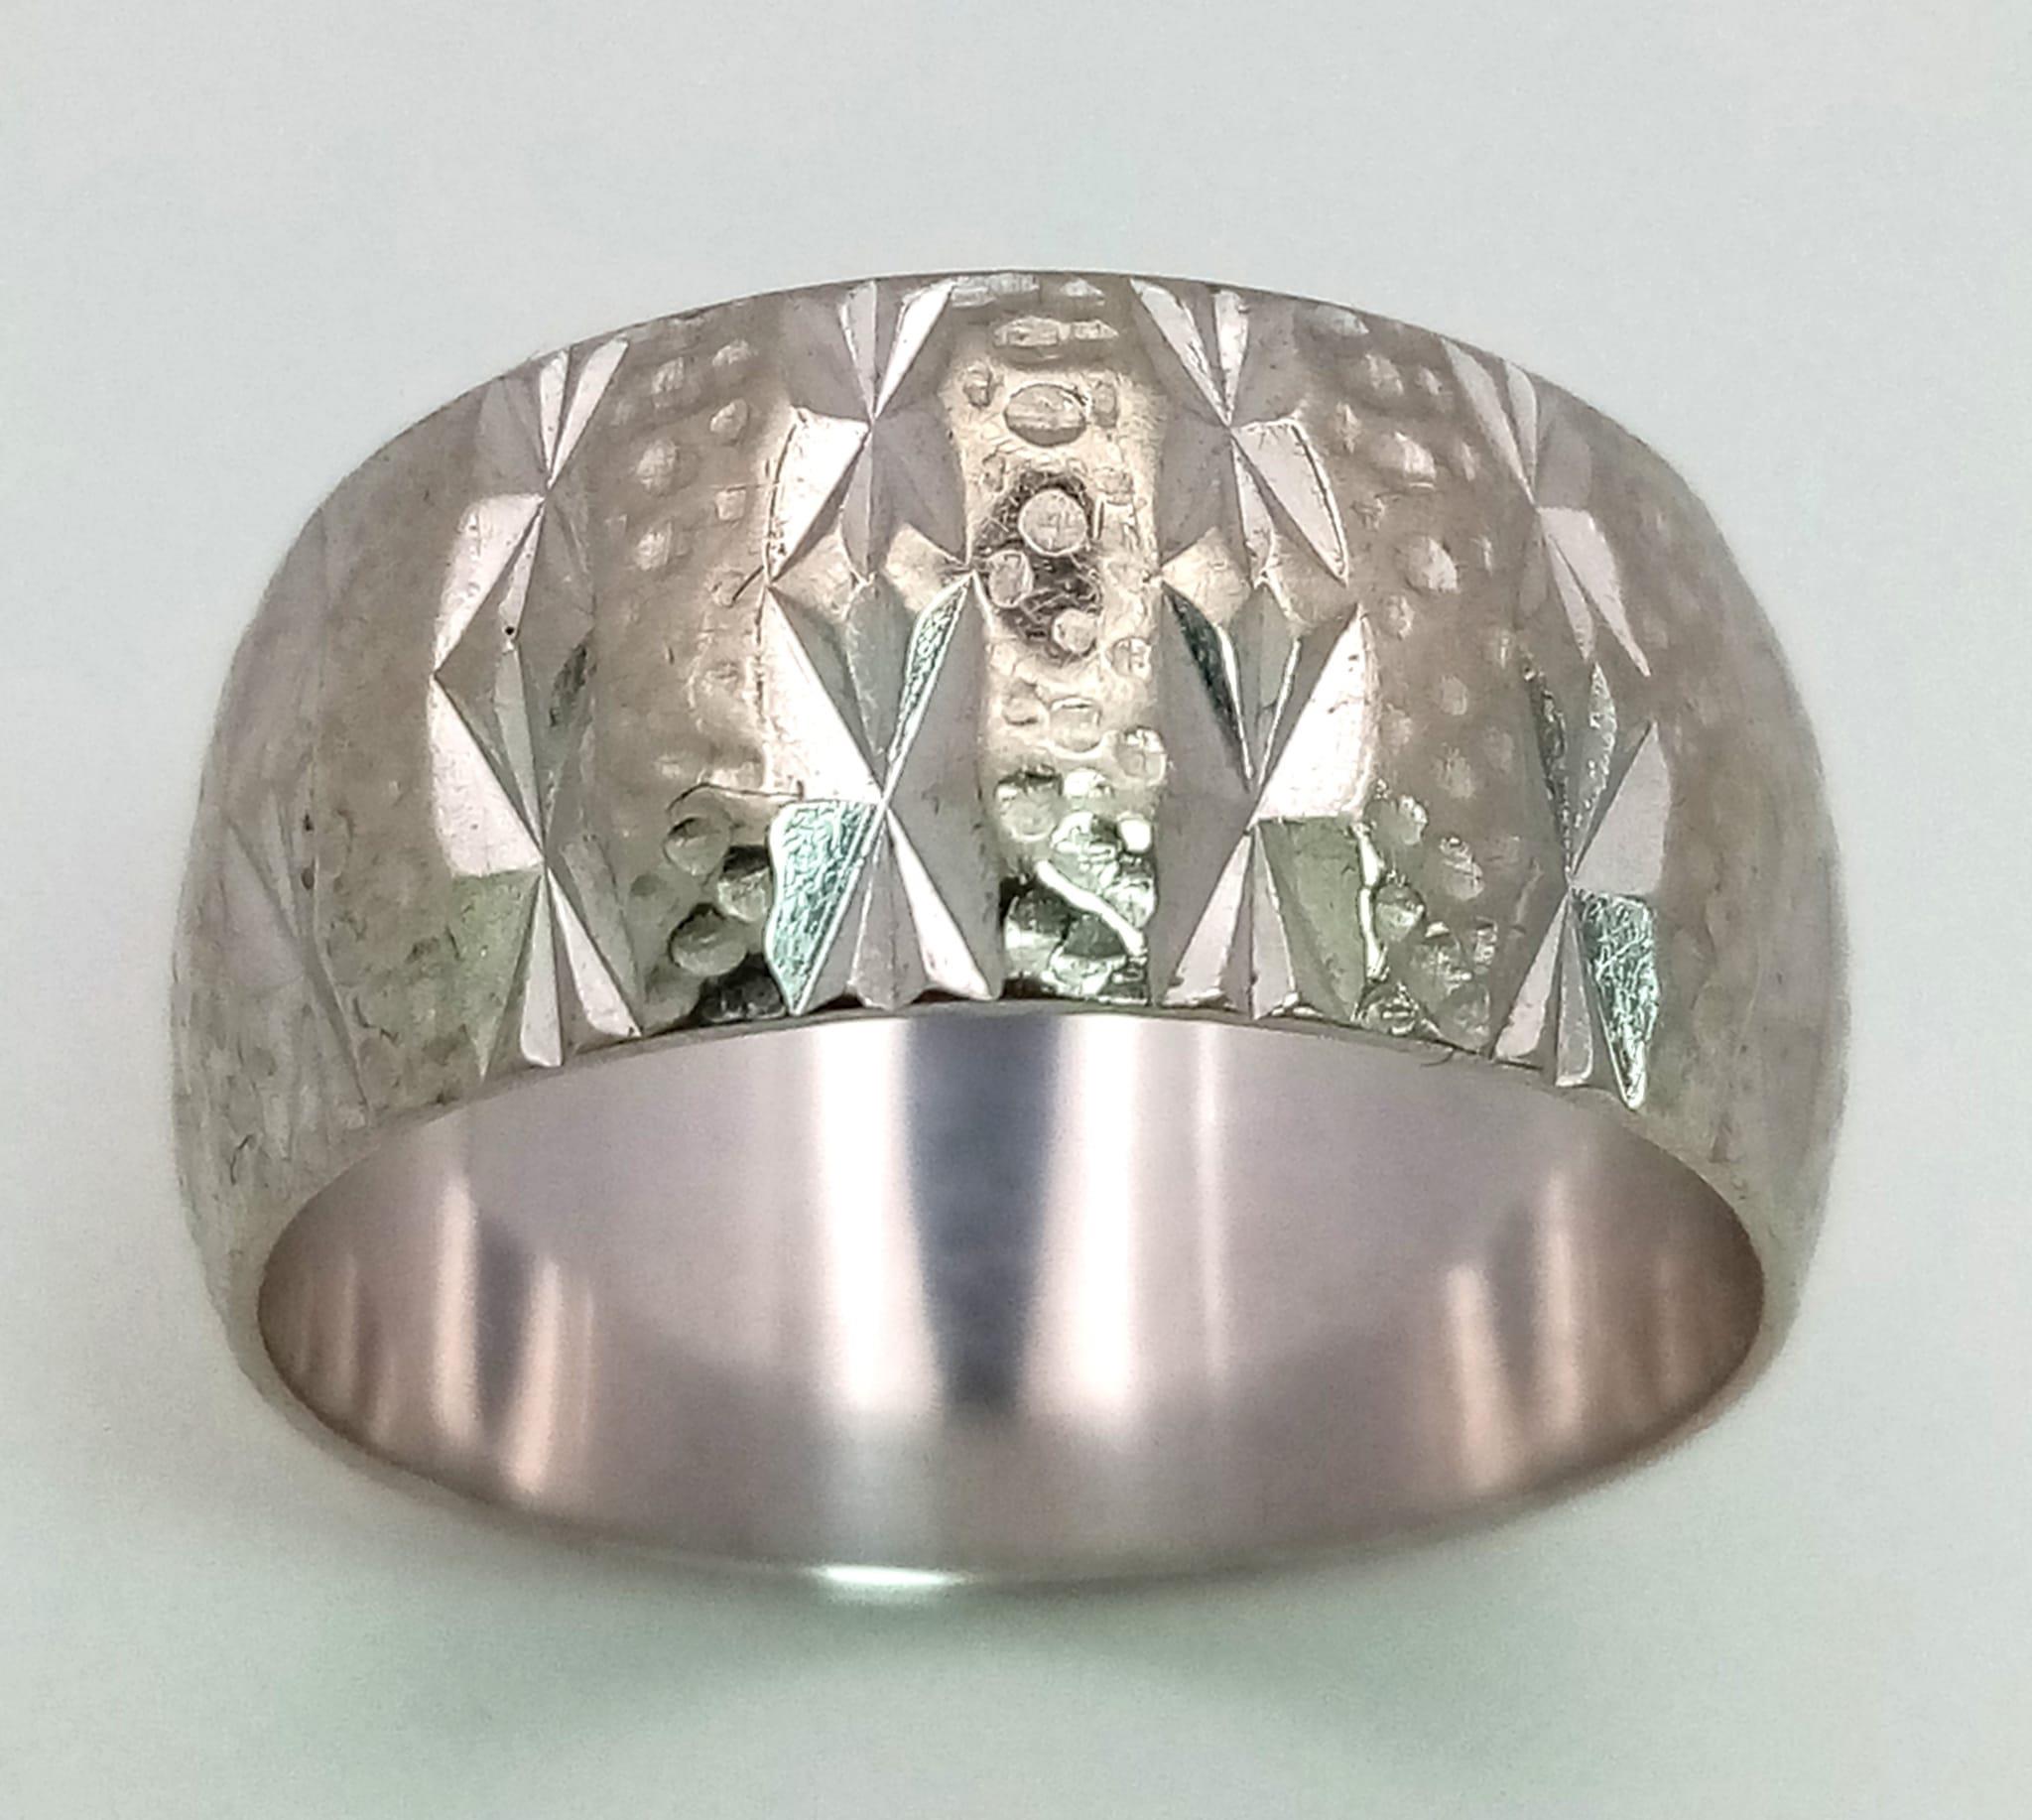 An 18 k white gold ring with a cleverly engraved surface reflecting the light, Rind size: K,